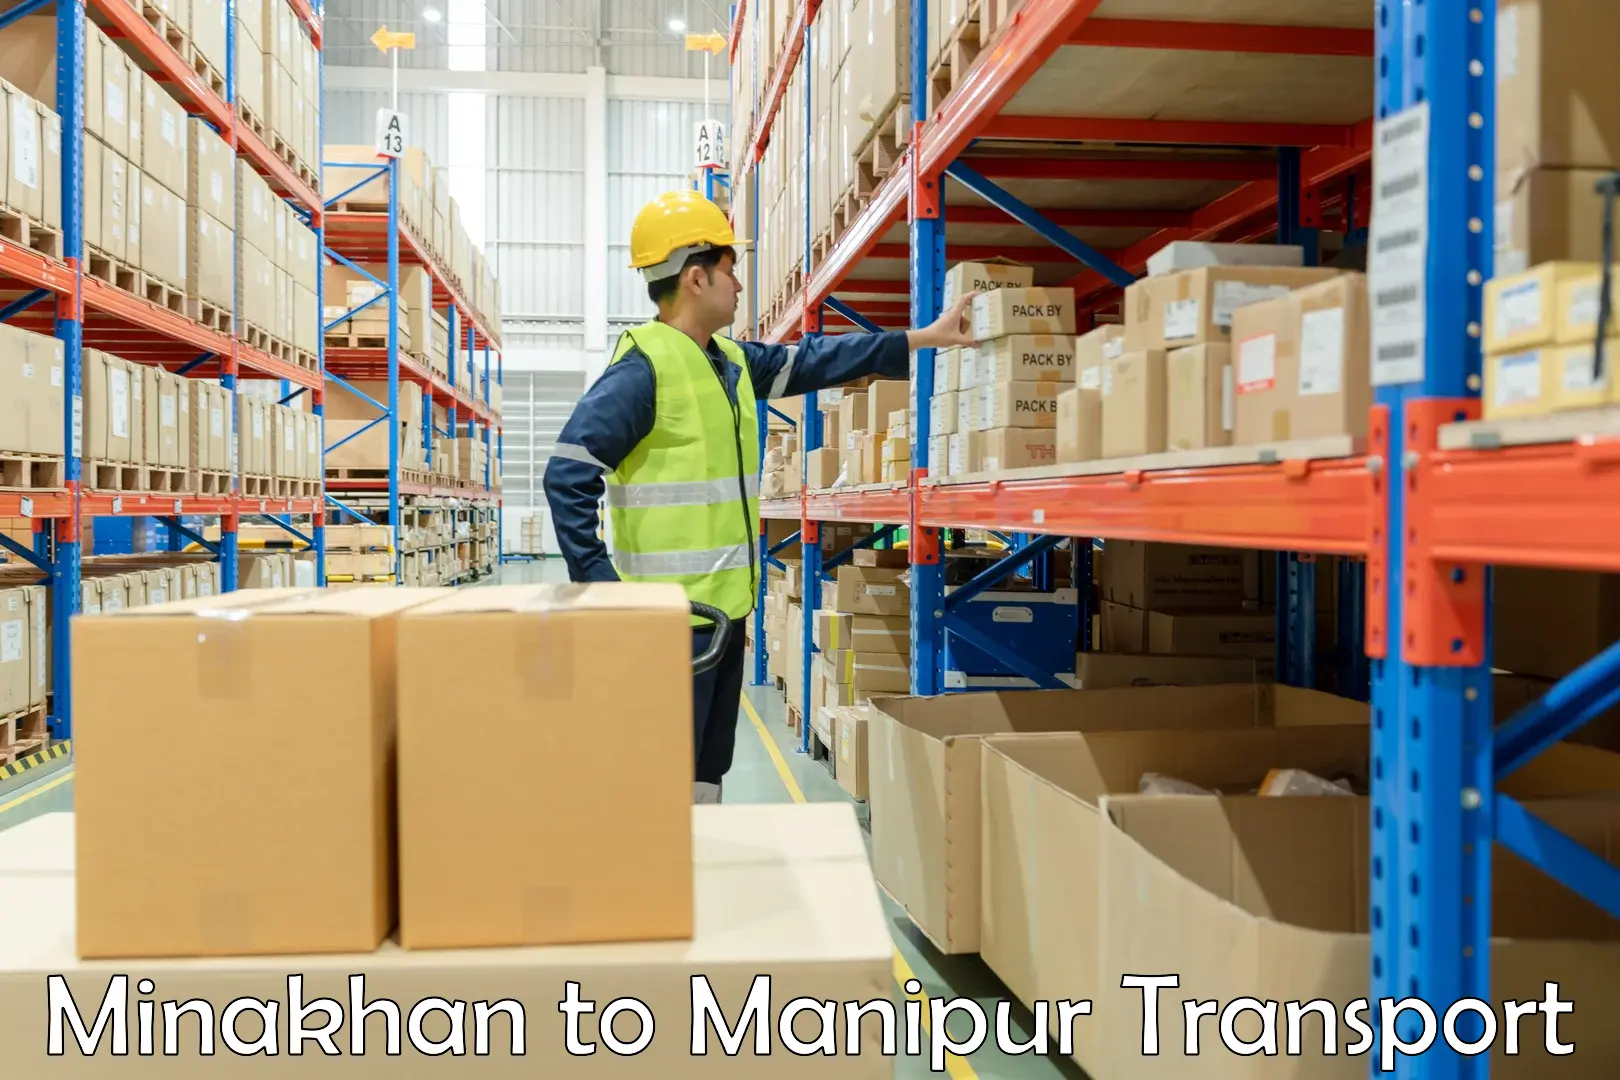 Transport shared services Minakhan to Manipur